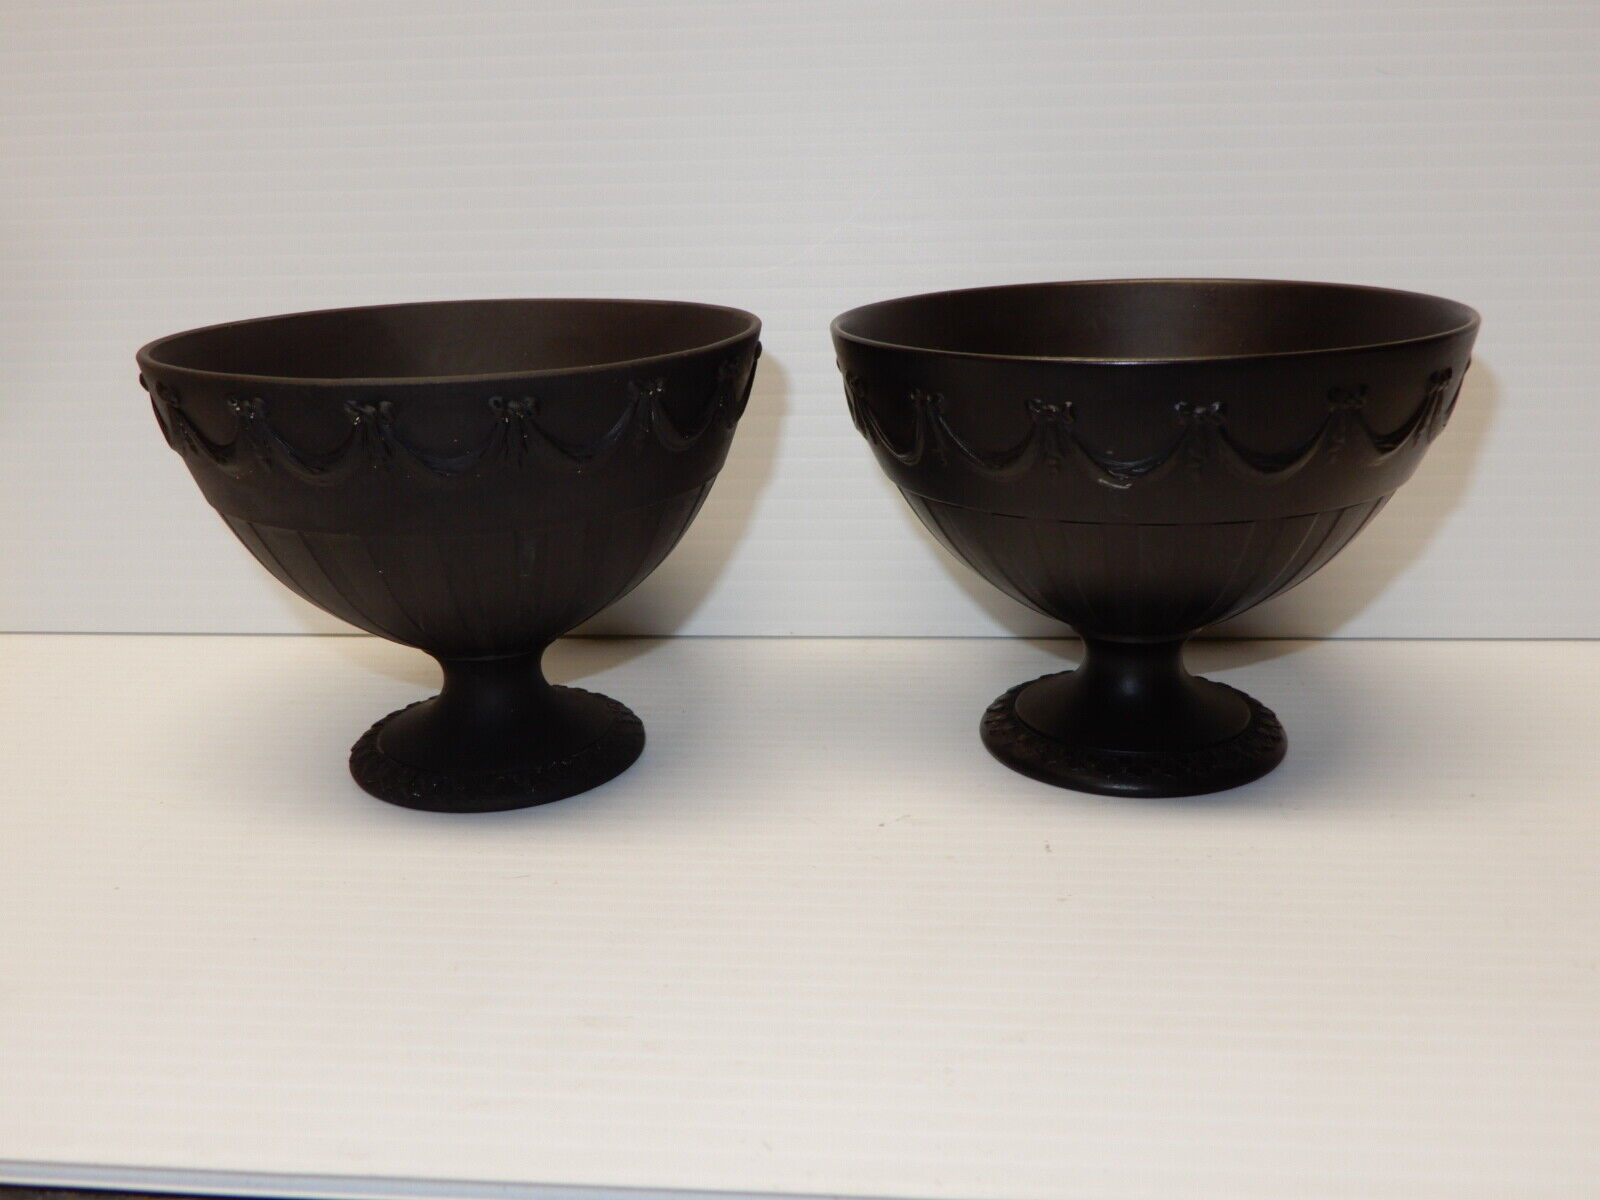 ANTIQUE WEDGWOOD BLACK BASALT PAIR OPEN CANDY DISHES CA. 1954